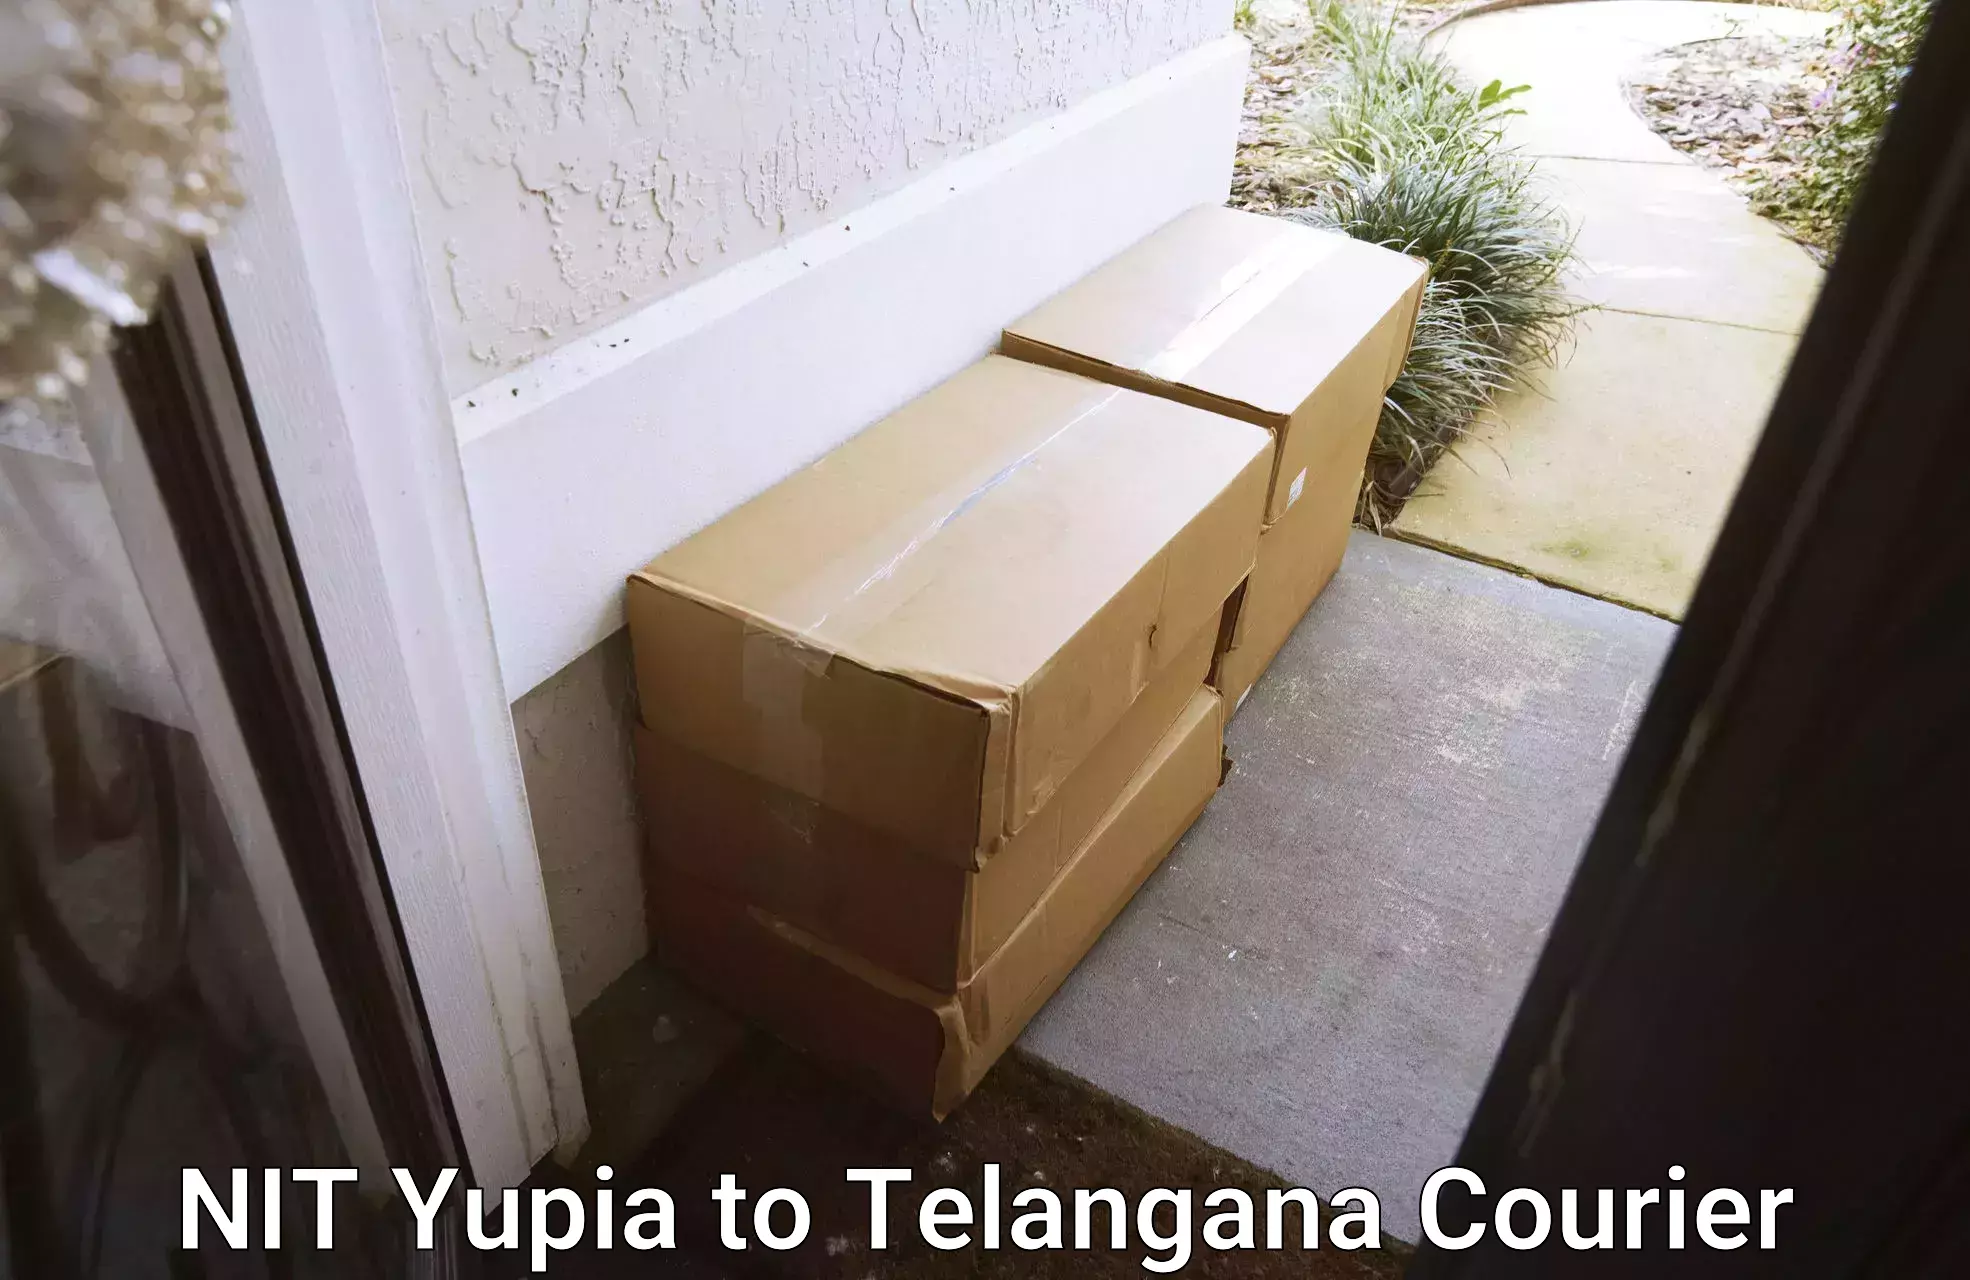 Efficient parcel service NIT Yupia to Husnabad